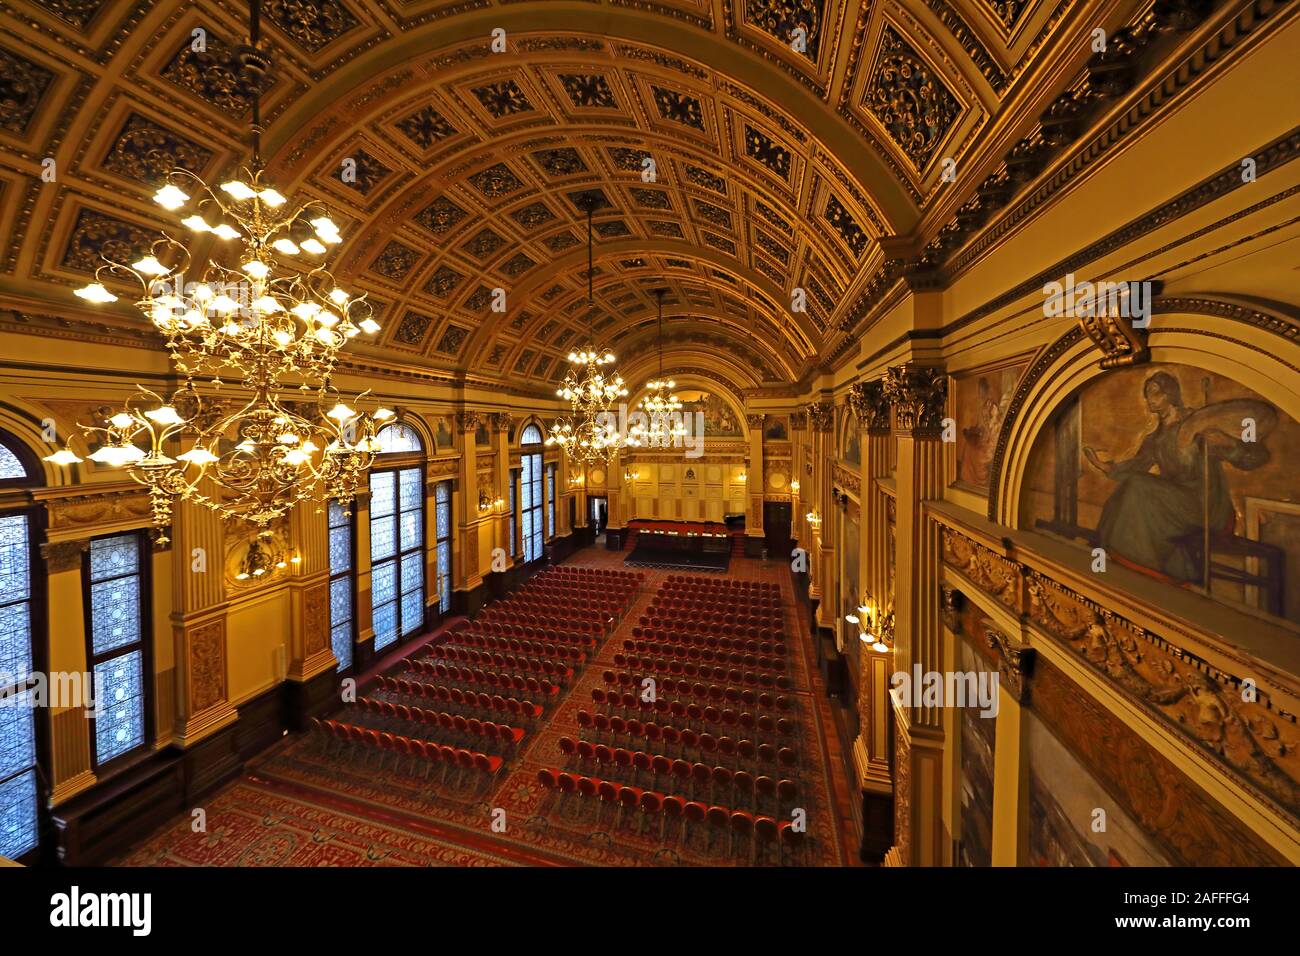 The Banqueting Hall,Glasgow City Chambers,Town Hall,George Square,Strathclyde,Scotland,UK, G2 1DU Banque D'Images